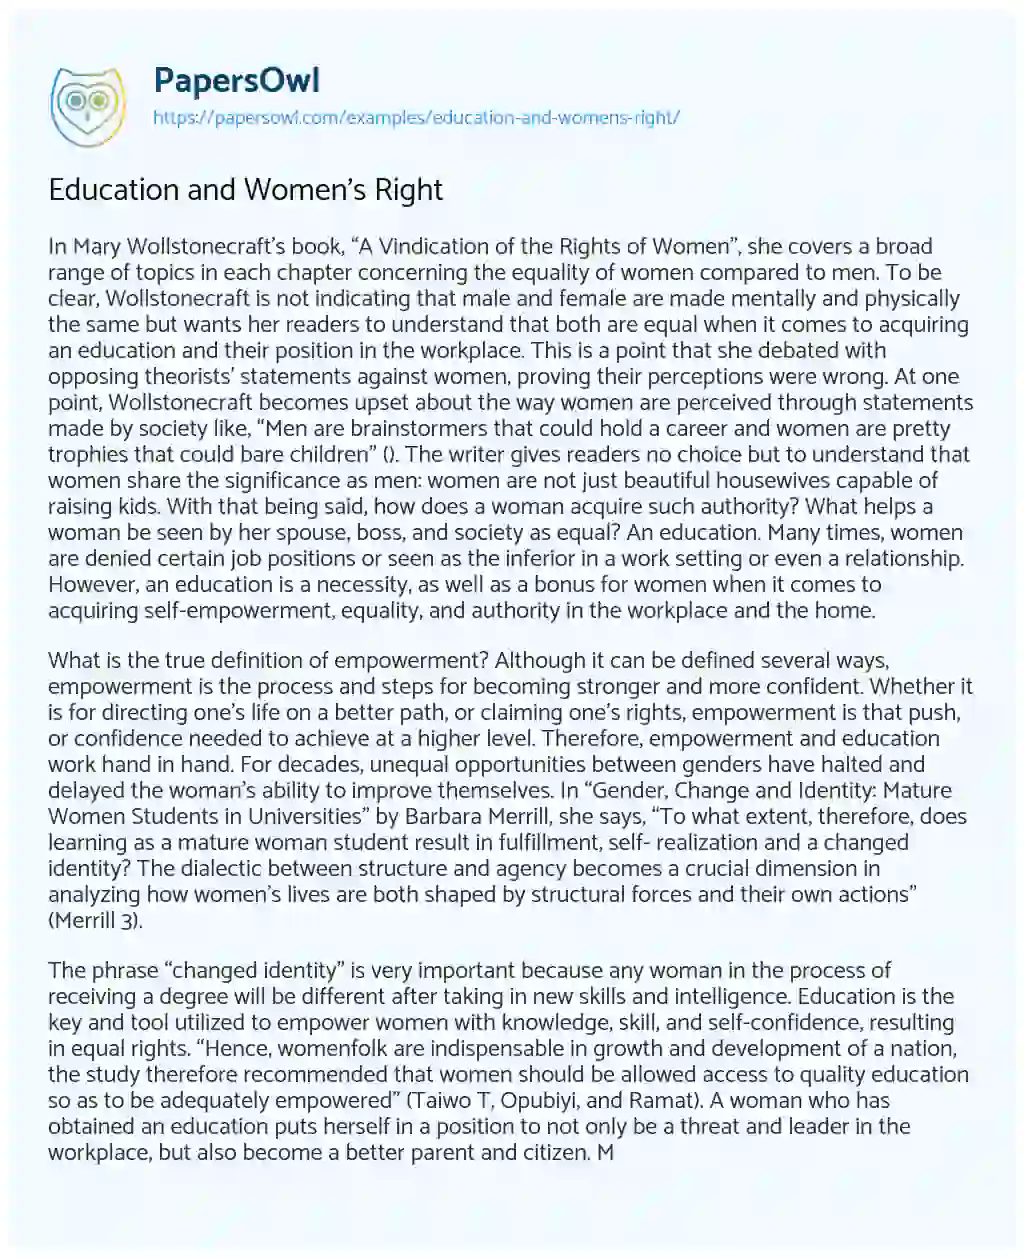 Essay on Education and Women’s Right